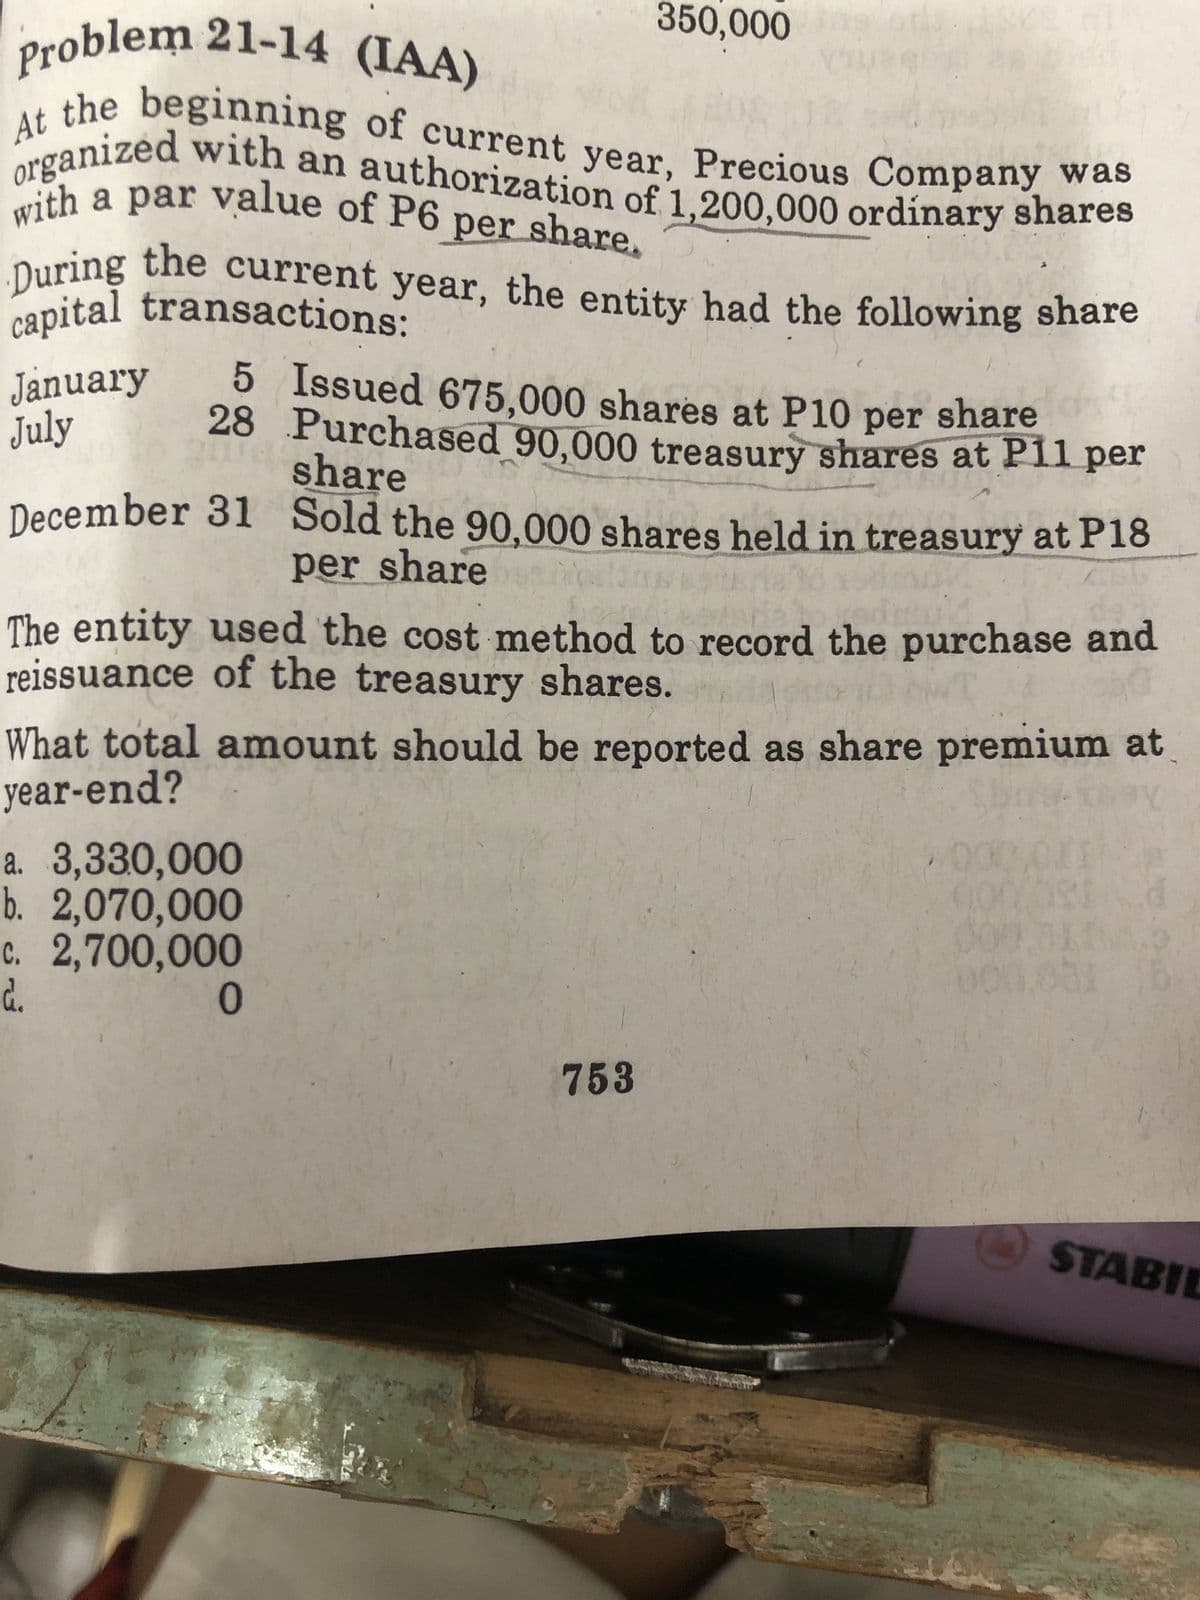 Problem 21-14 (IAA)
At
the beginning of current year, Precious Company was
with a par value of P6 per share.
organized with an authorization of 1,200,000 ordinary shares
capital transactions:
During the current year, the entity had the following share
January
July
5 Issued 675,000 shares at P10 per share
share
28 Purchased 90,000 treasury shares at P11 per
Sold the 90,000 shares held in treasury at P18
per share bein
December 31
350,000
The entity used the cost method to record the purchase and
reissuance of the treasury shares.
What total amount should be reported as share premium at
year-end?
SH
a. 3,330,000
b. 2,070,000
c. 2,700,000
d.
0
753
200
000.001 6:
STABIL